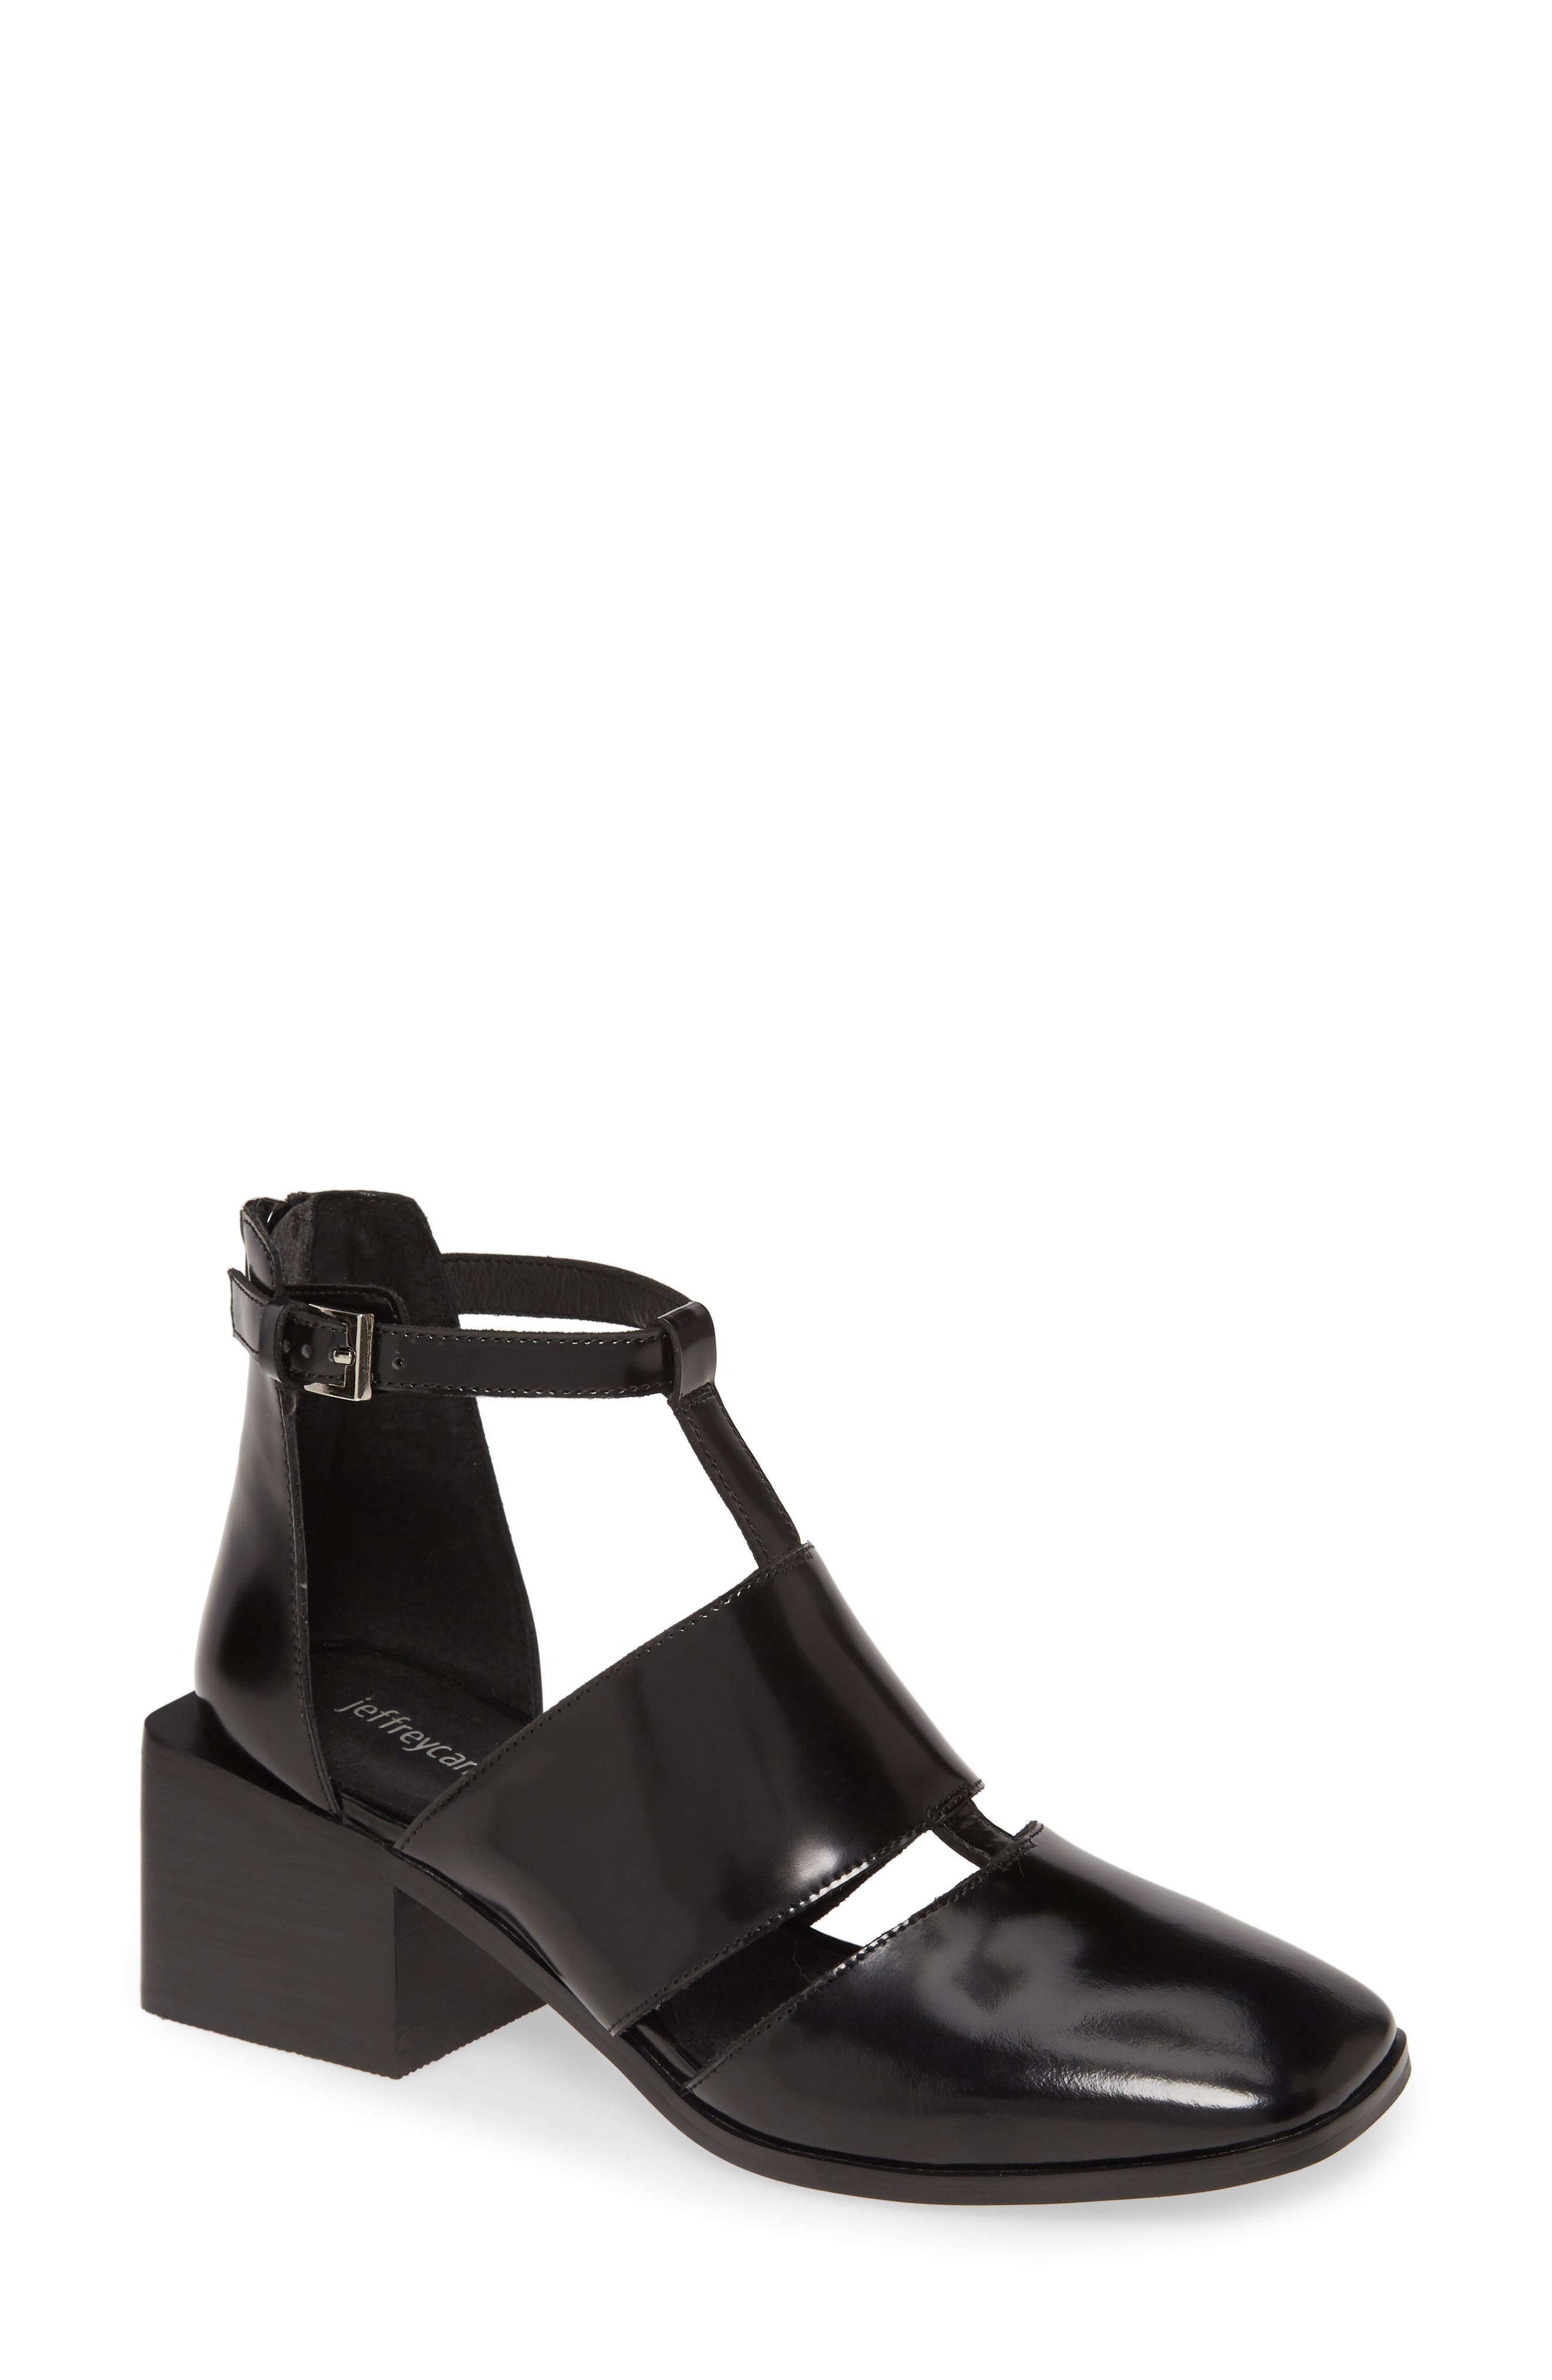 jeffrey campbell cut out boot